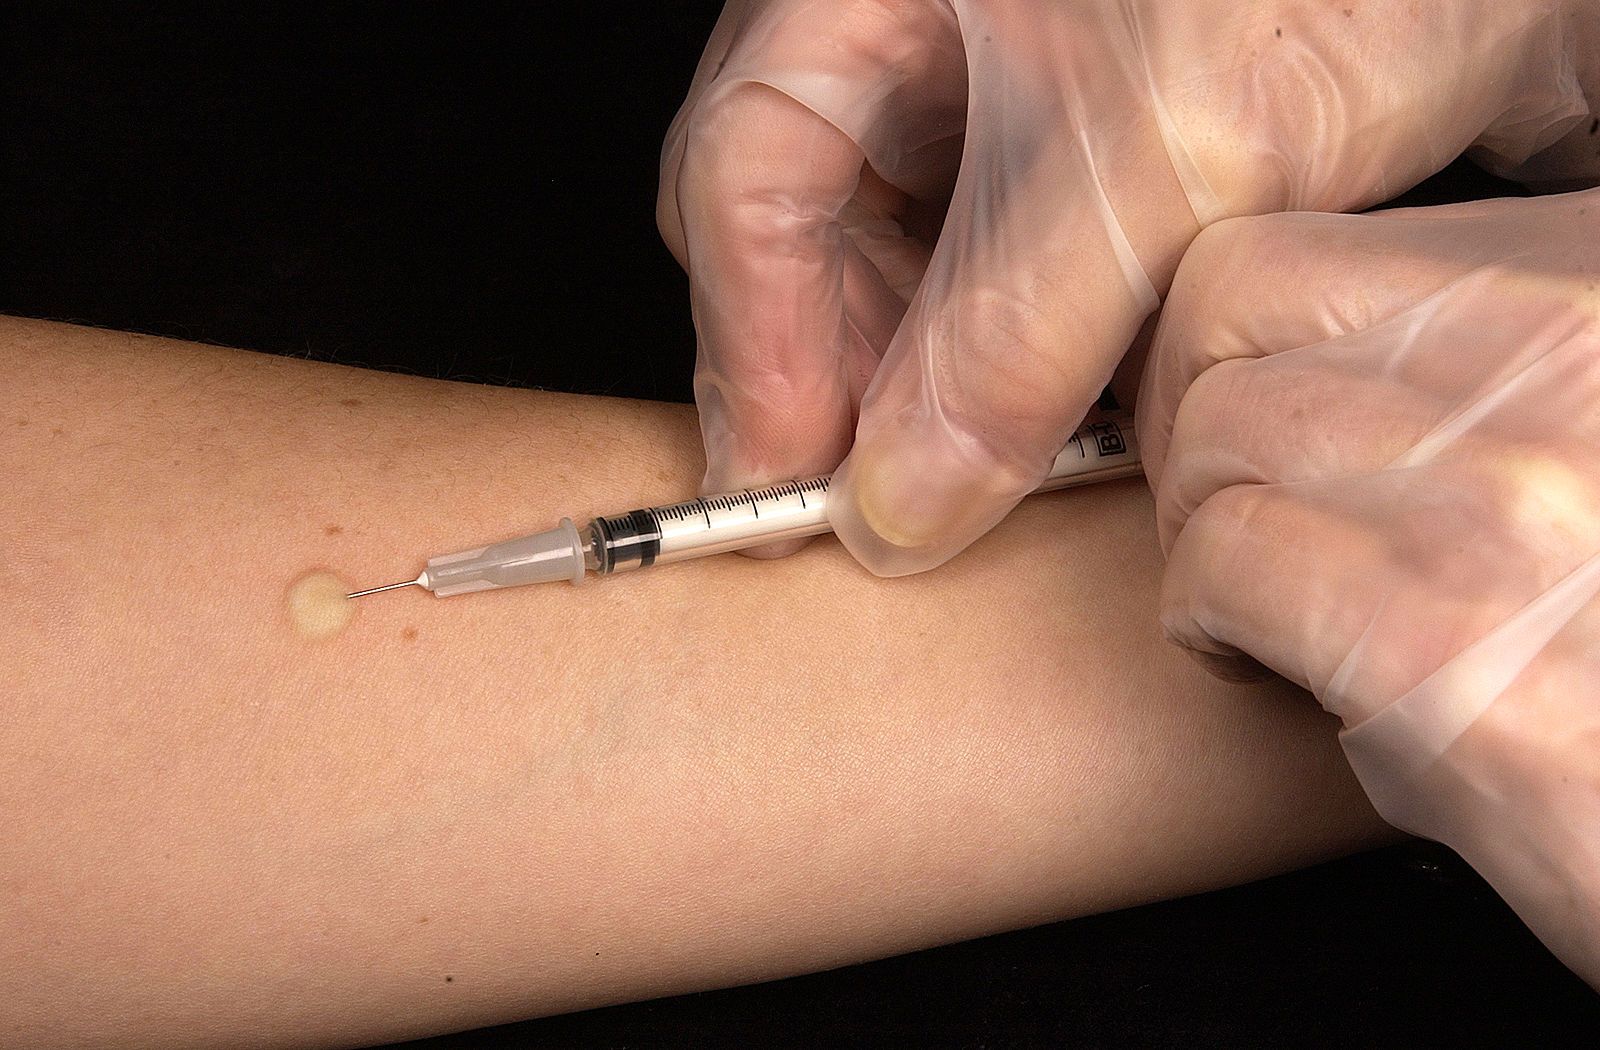 Administration of the Mantoux Tuberculin Skin Test SimpleMed